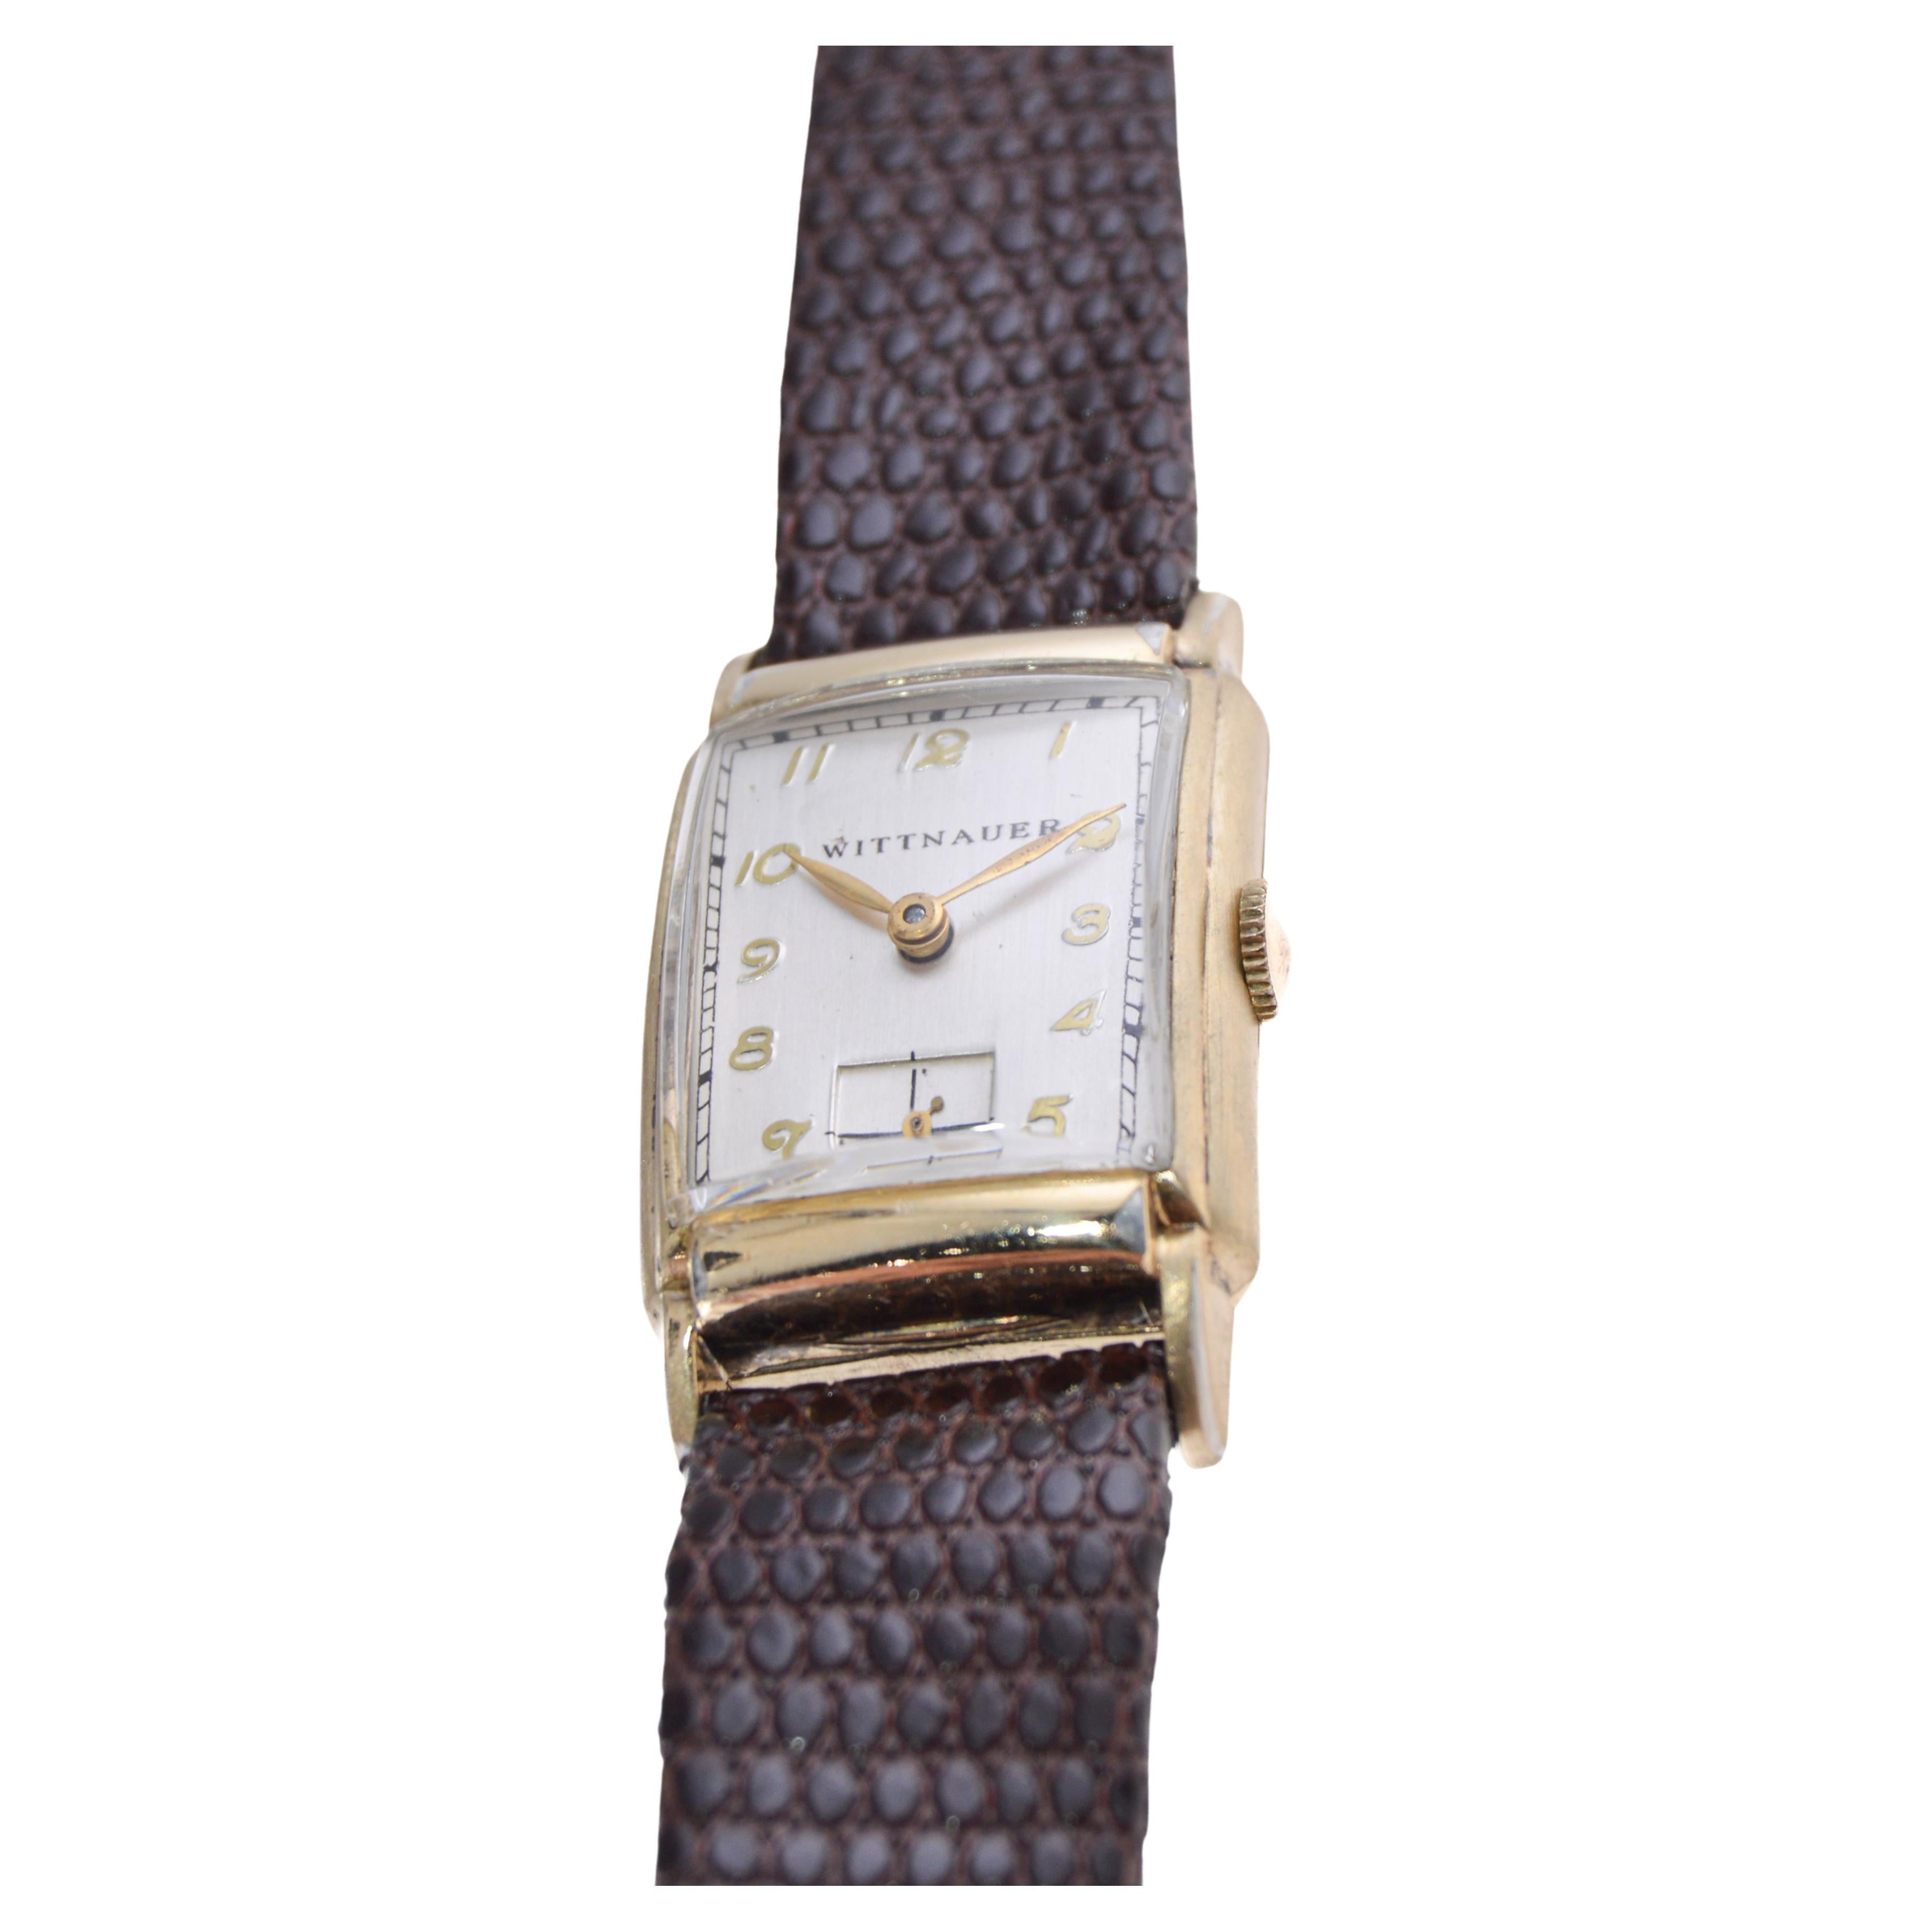 Wittnauer Art Deco Gold Filled Tank Style Watch circa 1940's In Excellent Condition For Sale In Long Beach, CA